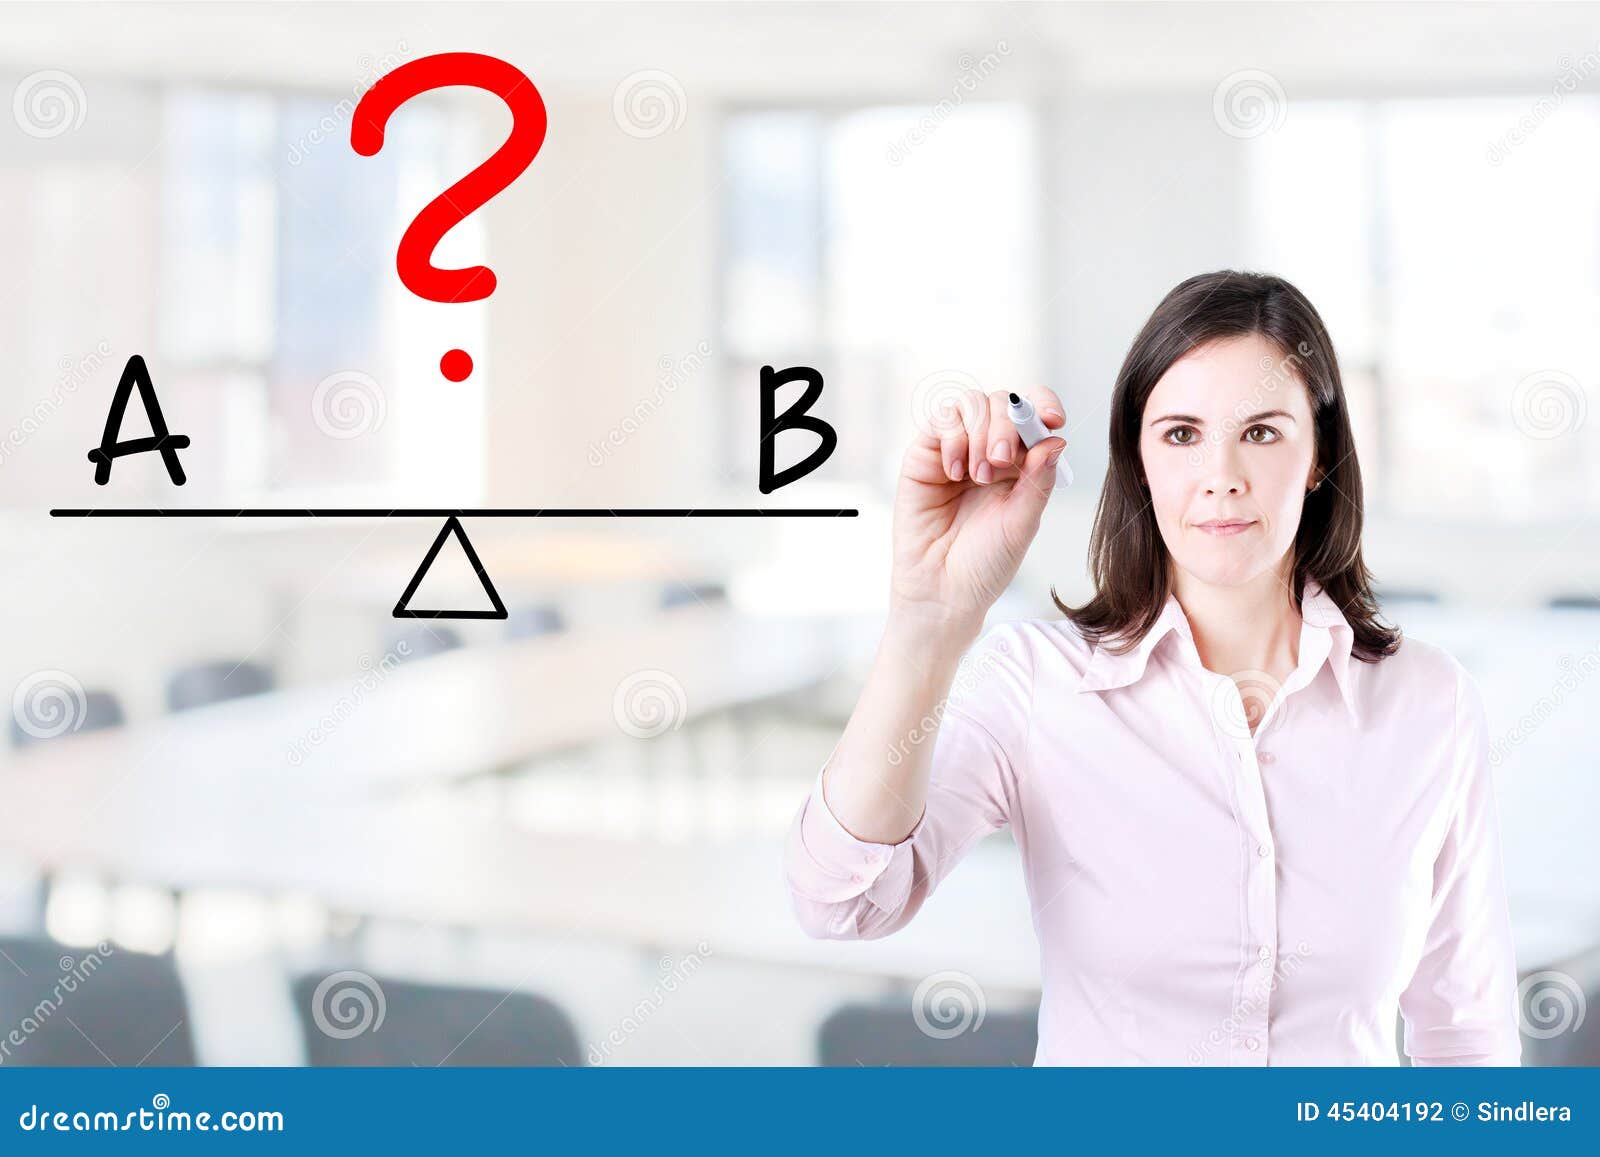 young business woman writing a and b compare on balance bar. office background.